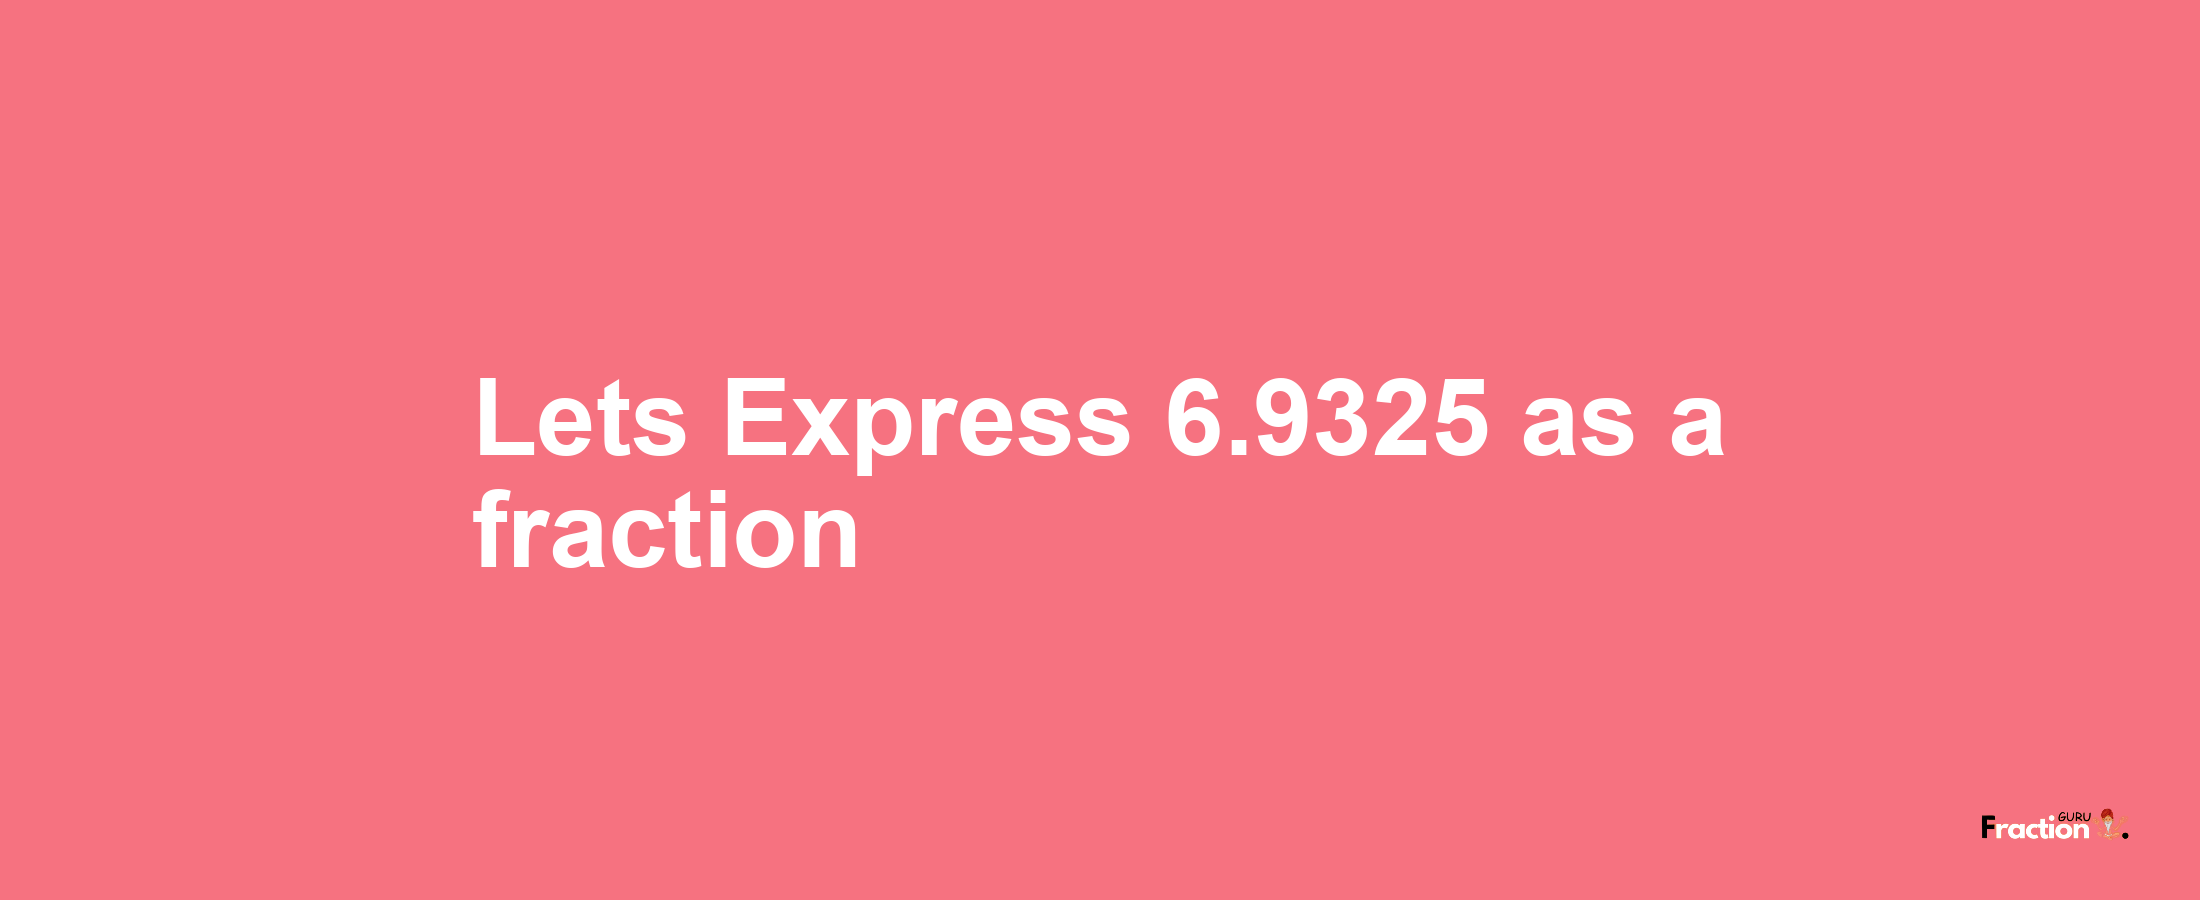 Lets Express 6.9325 as afraction